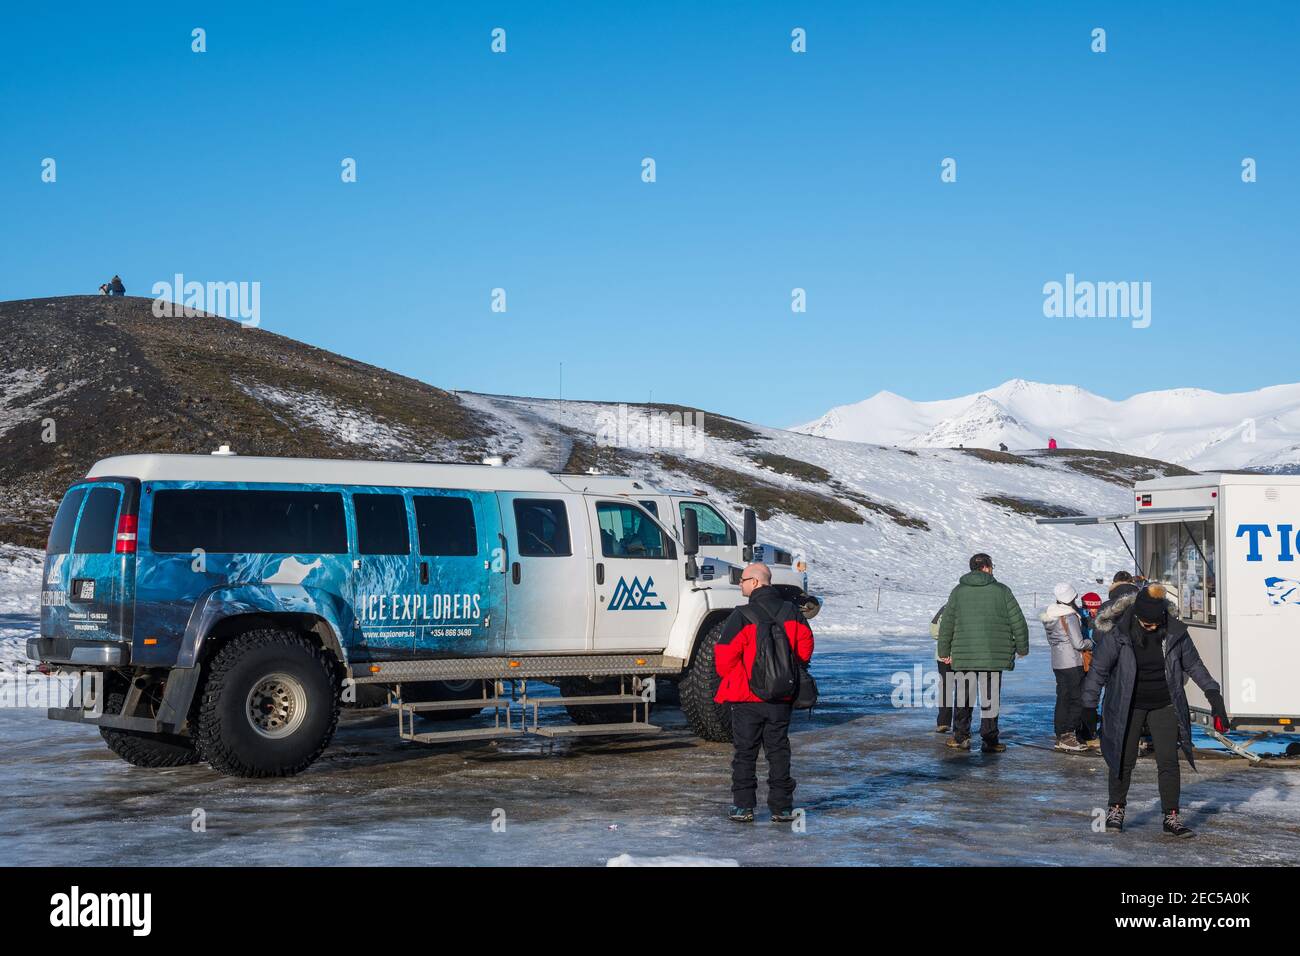 Jokulsarlon Iceland - February 17. 2019: people in front of glacier truck from Ice Explorers Stock Photo